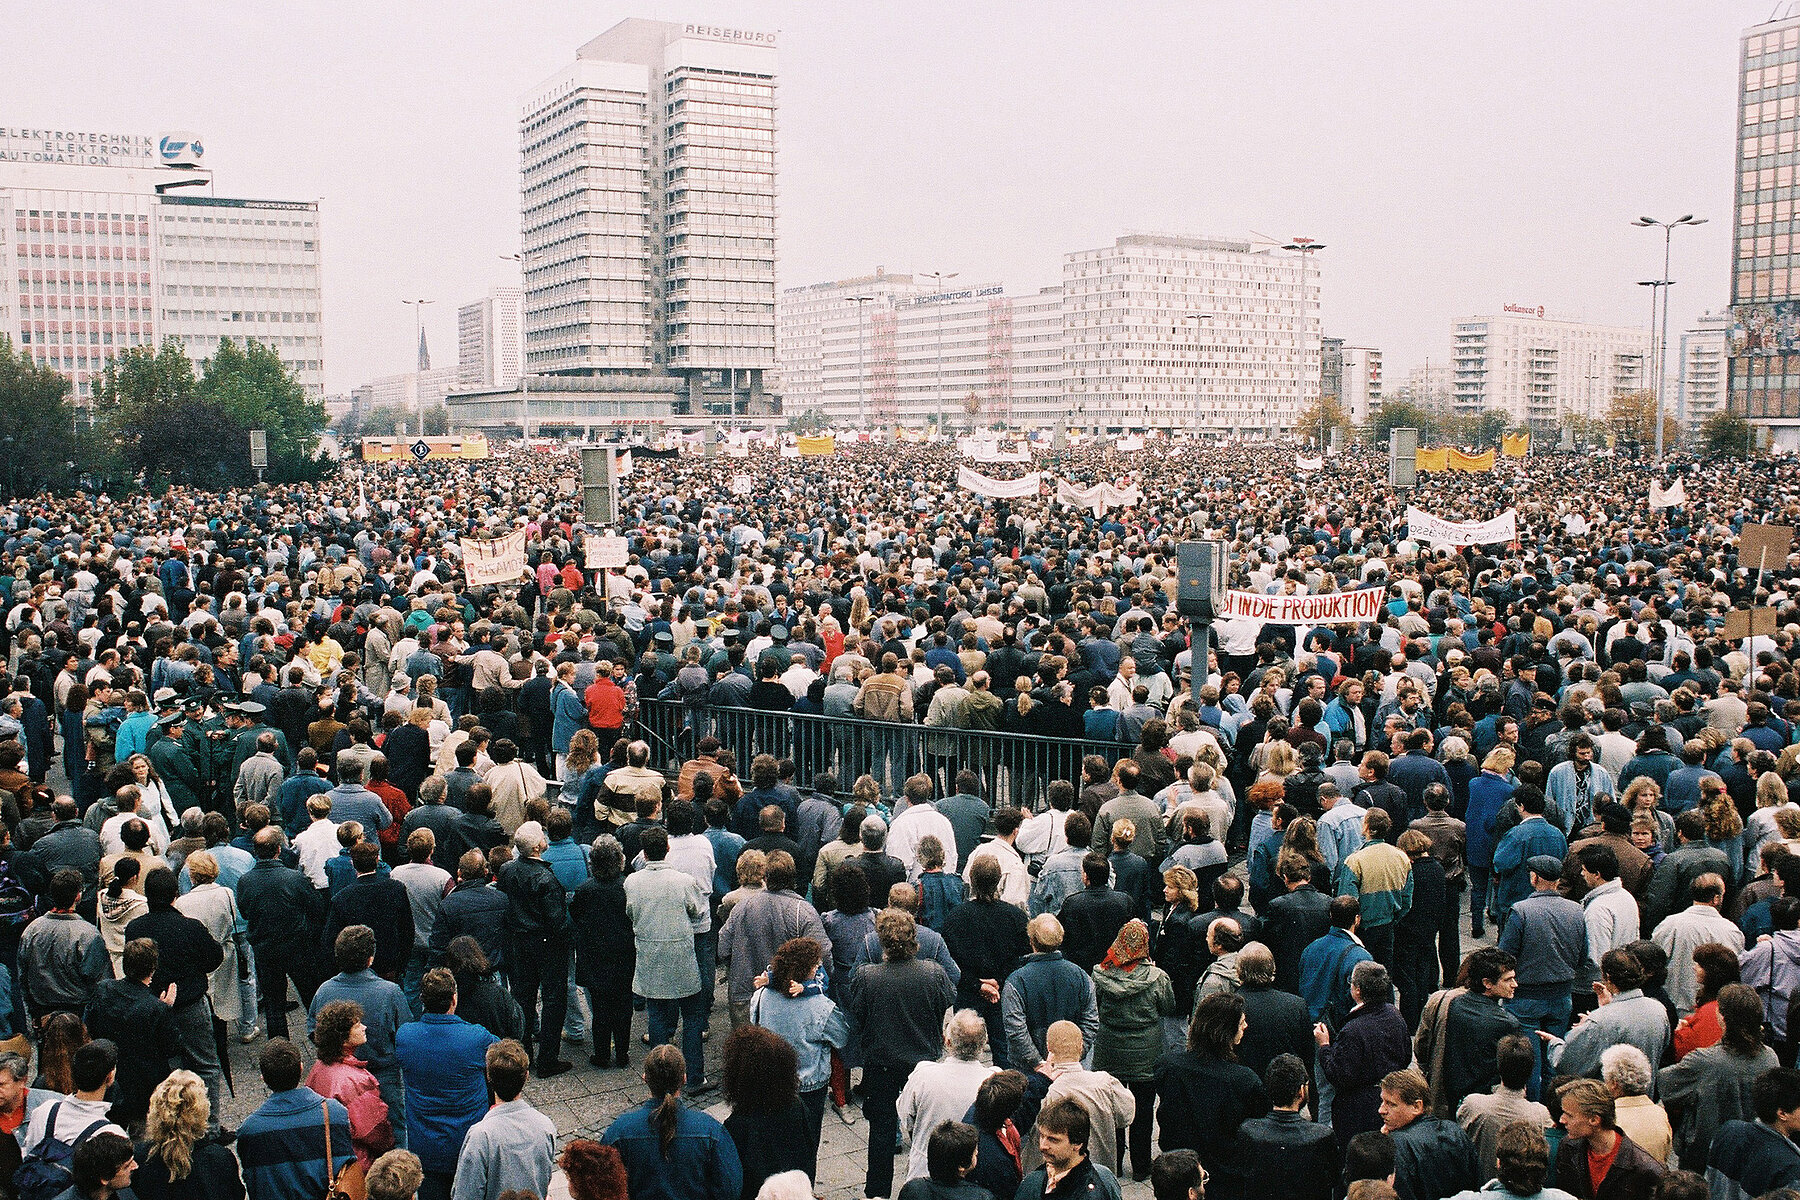 A large crowd of demonstrators on Alexanderplatz in East Berlin. In the background are high-rise buildings.